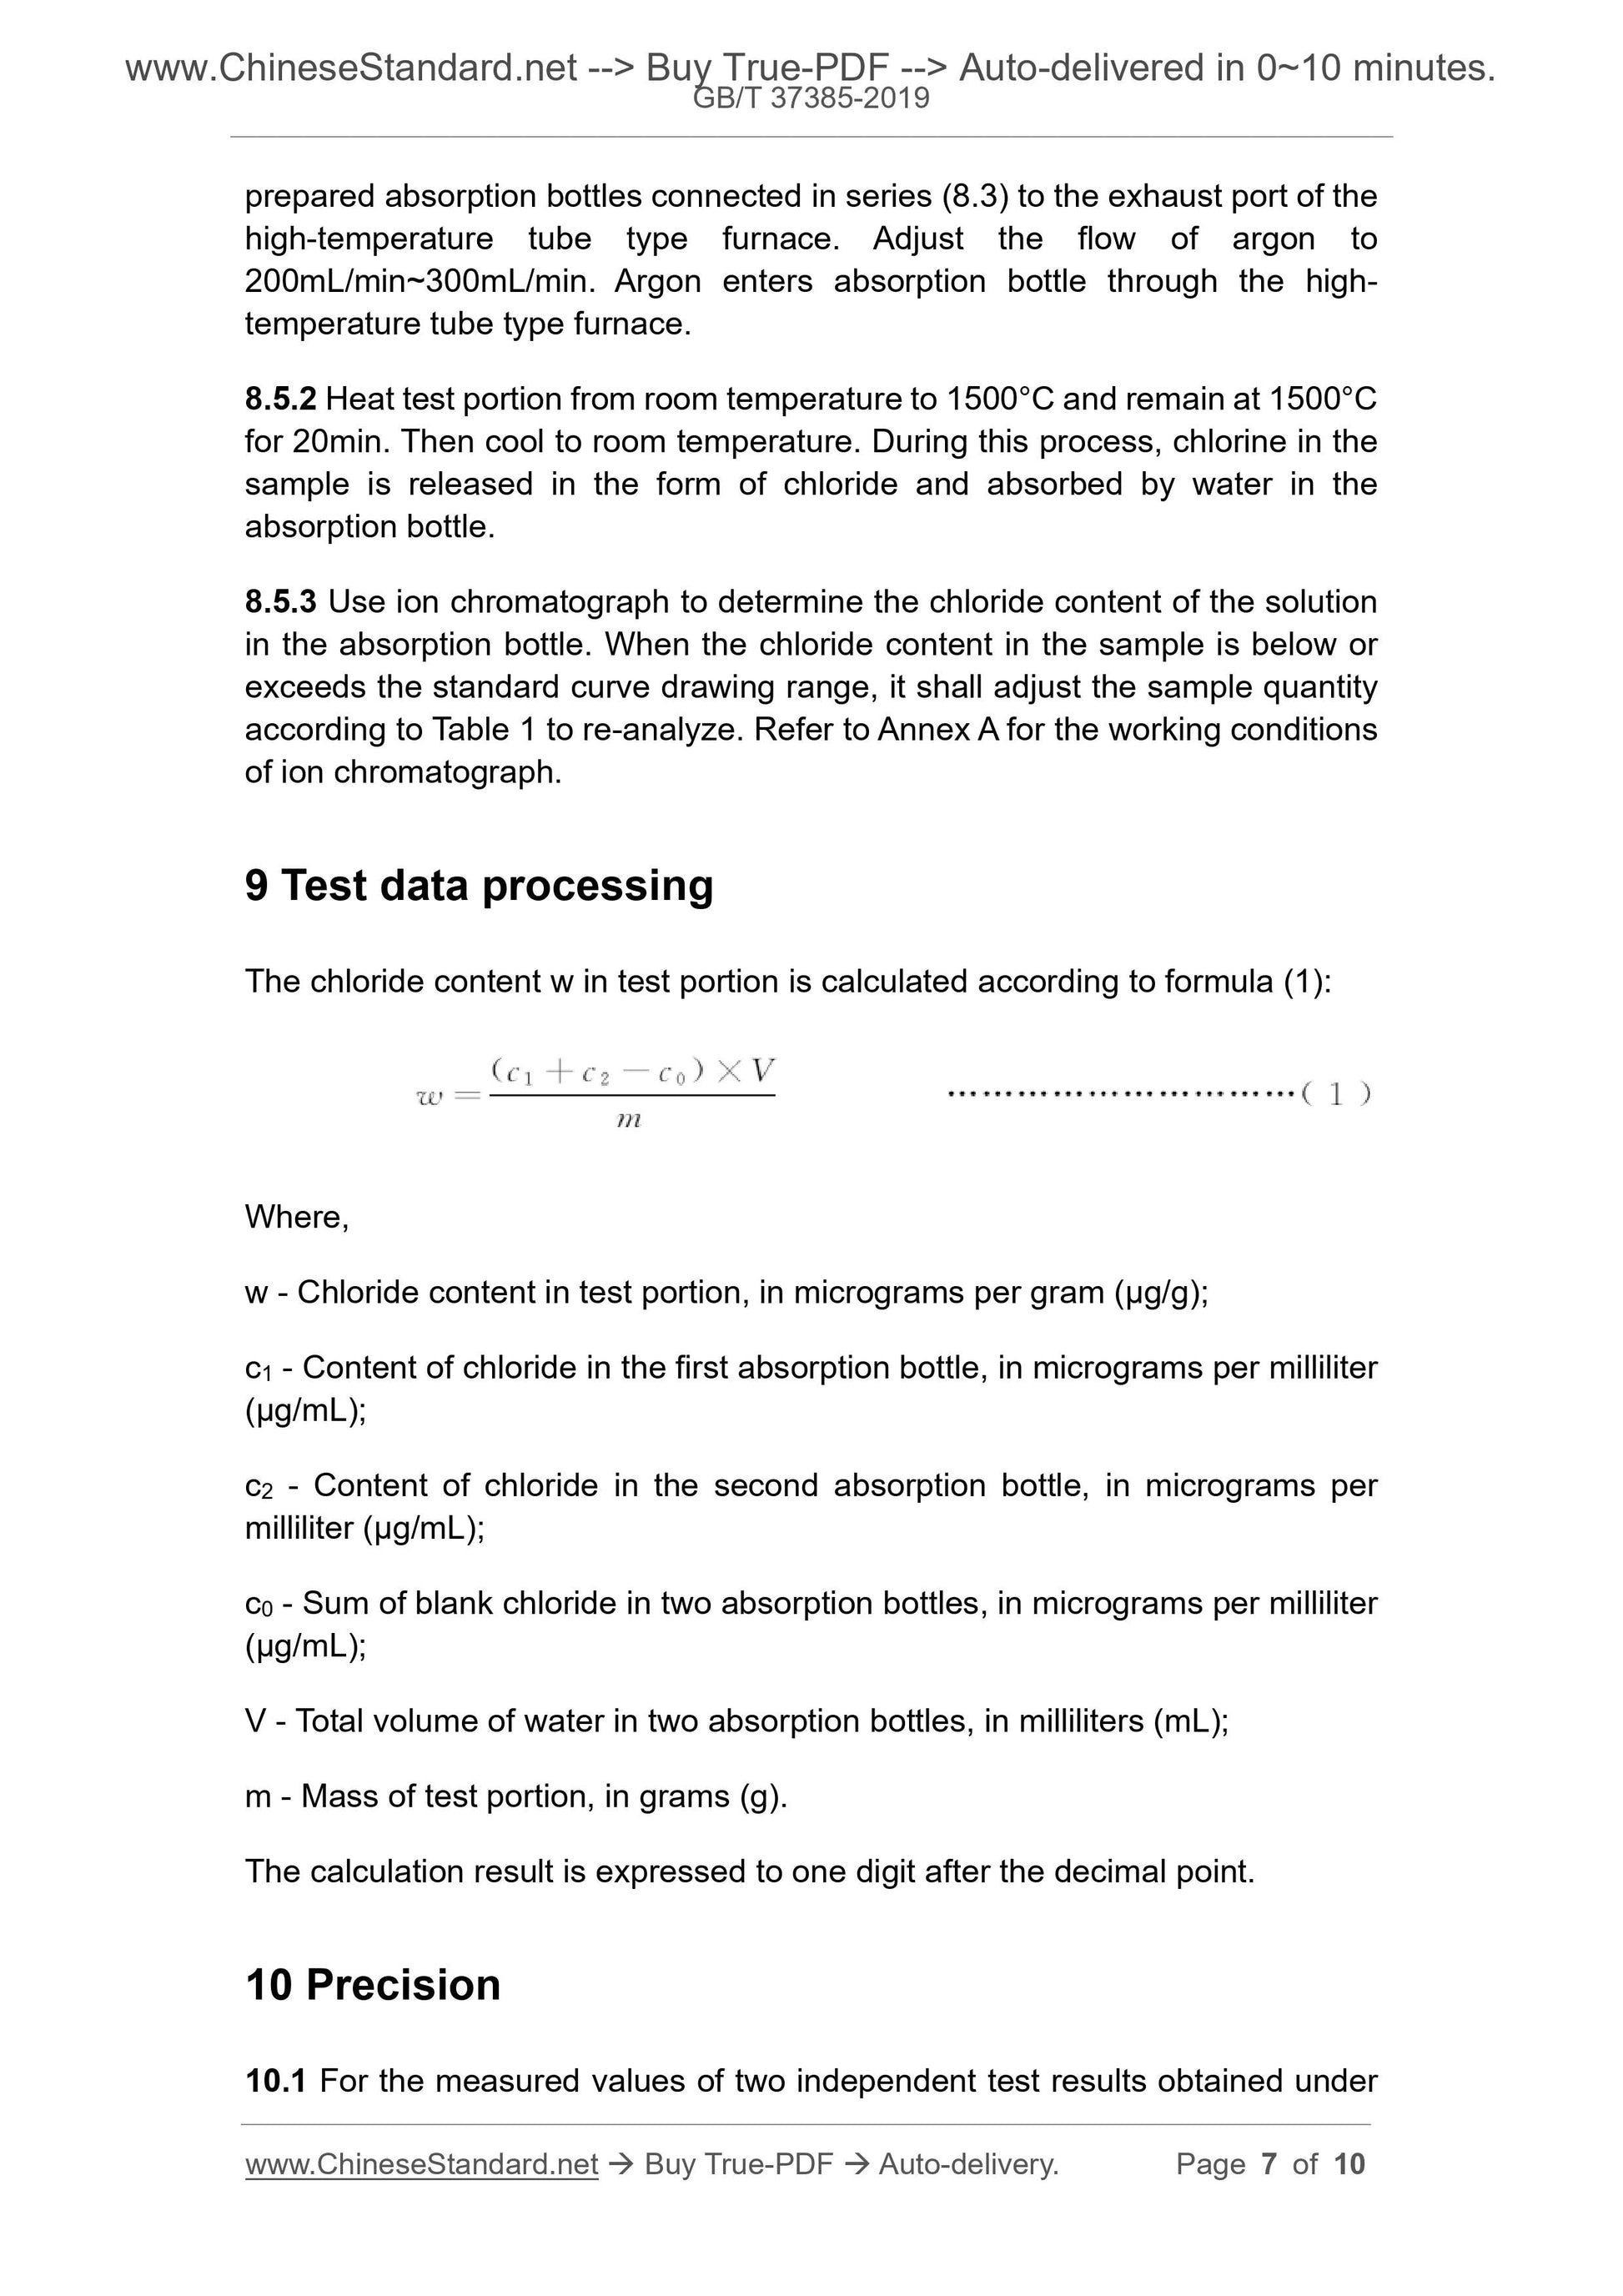 GB/T 37385-2019 Page 4